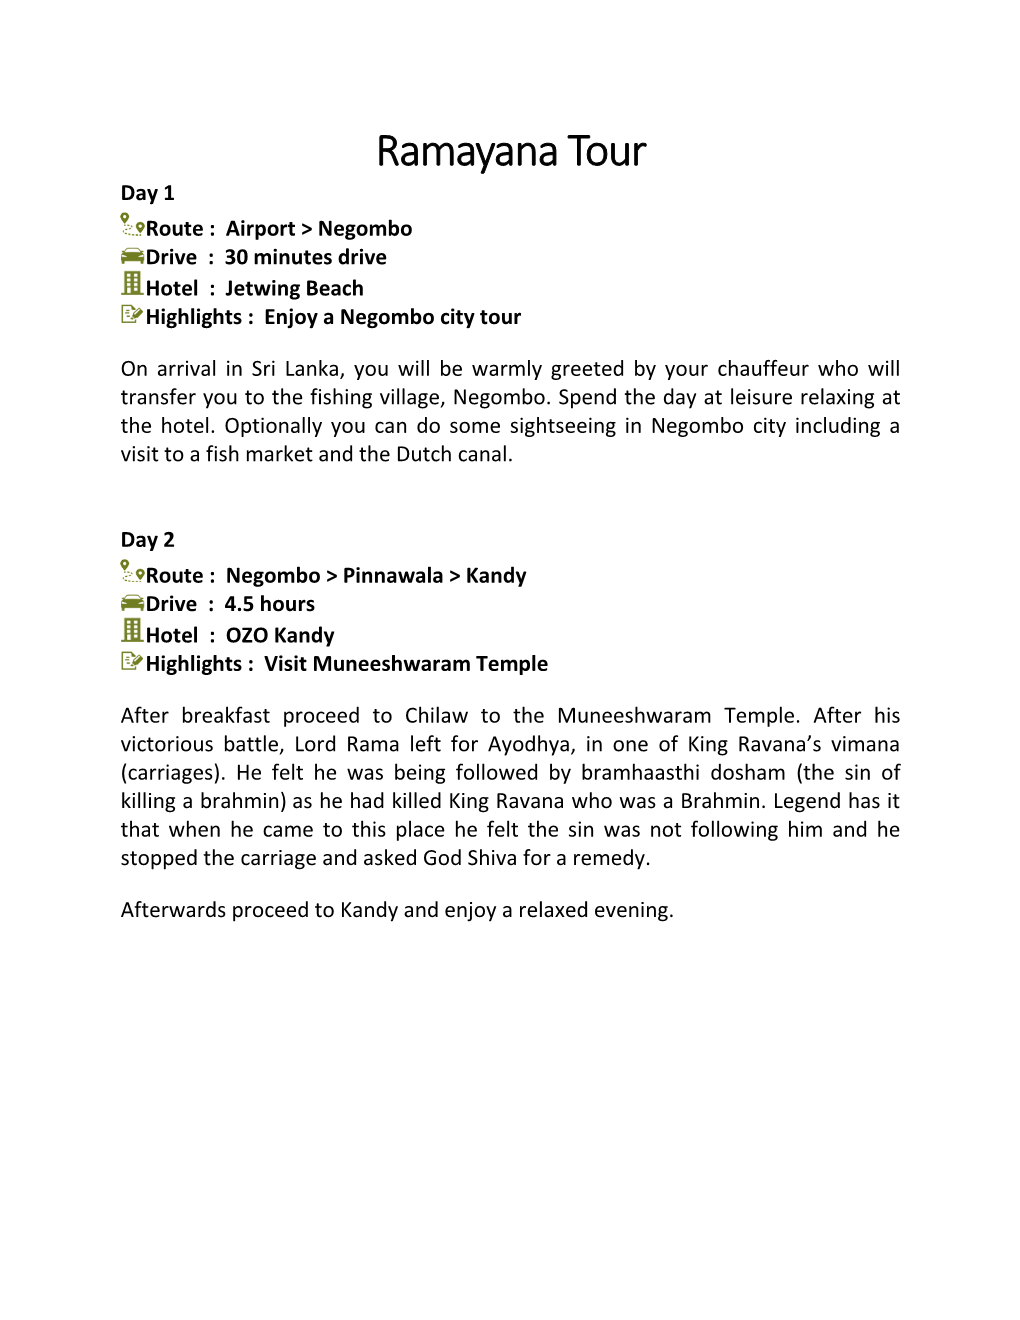 Ramayana Tour Day 1 Route : Airport > Negombo Drive : 30 Minutes Drive Hotel : Jetwing Beach Highlights : Enjoy a Negombo City Tour